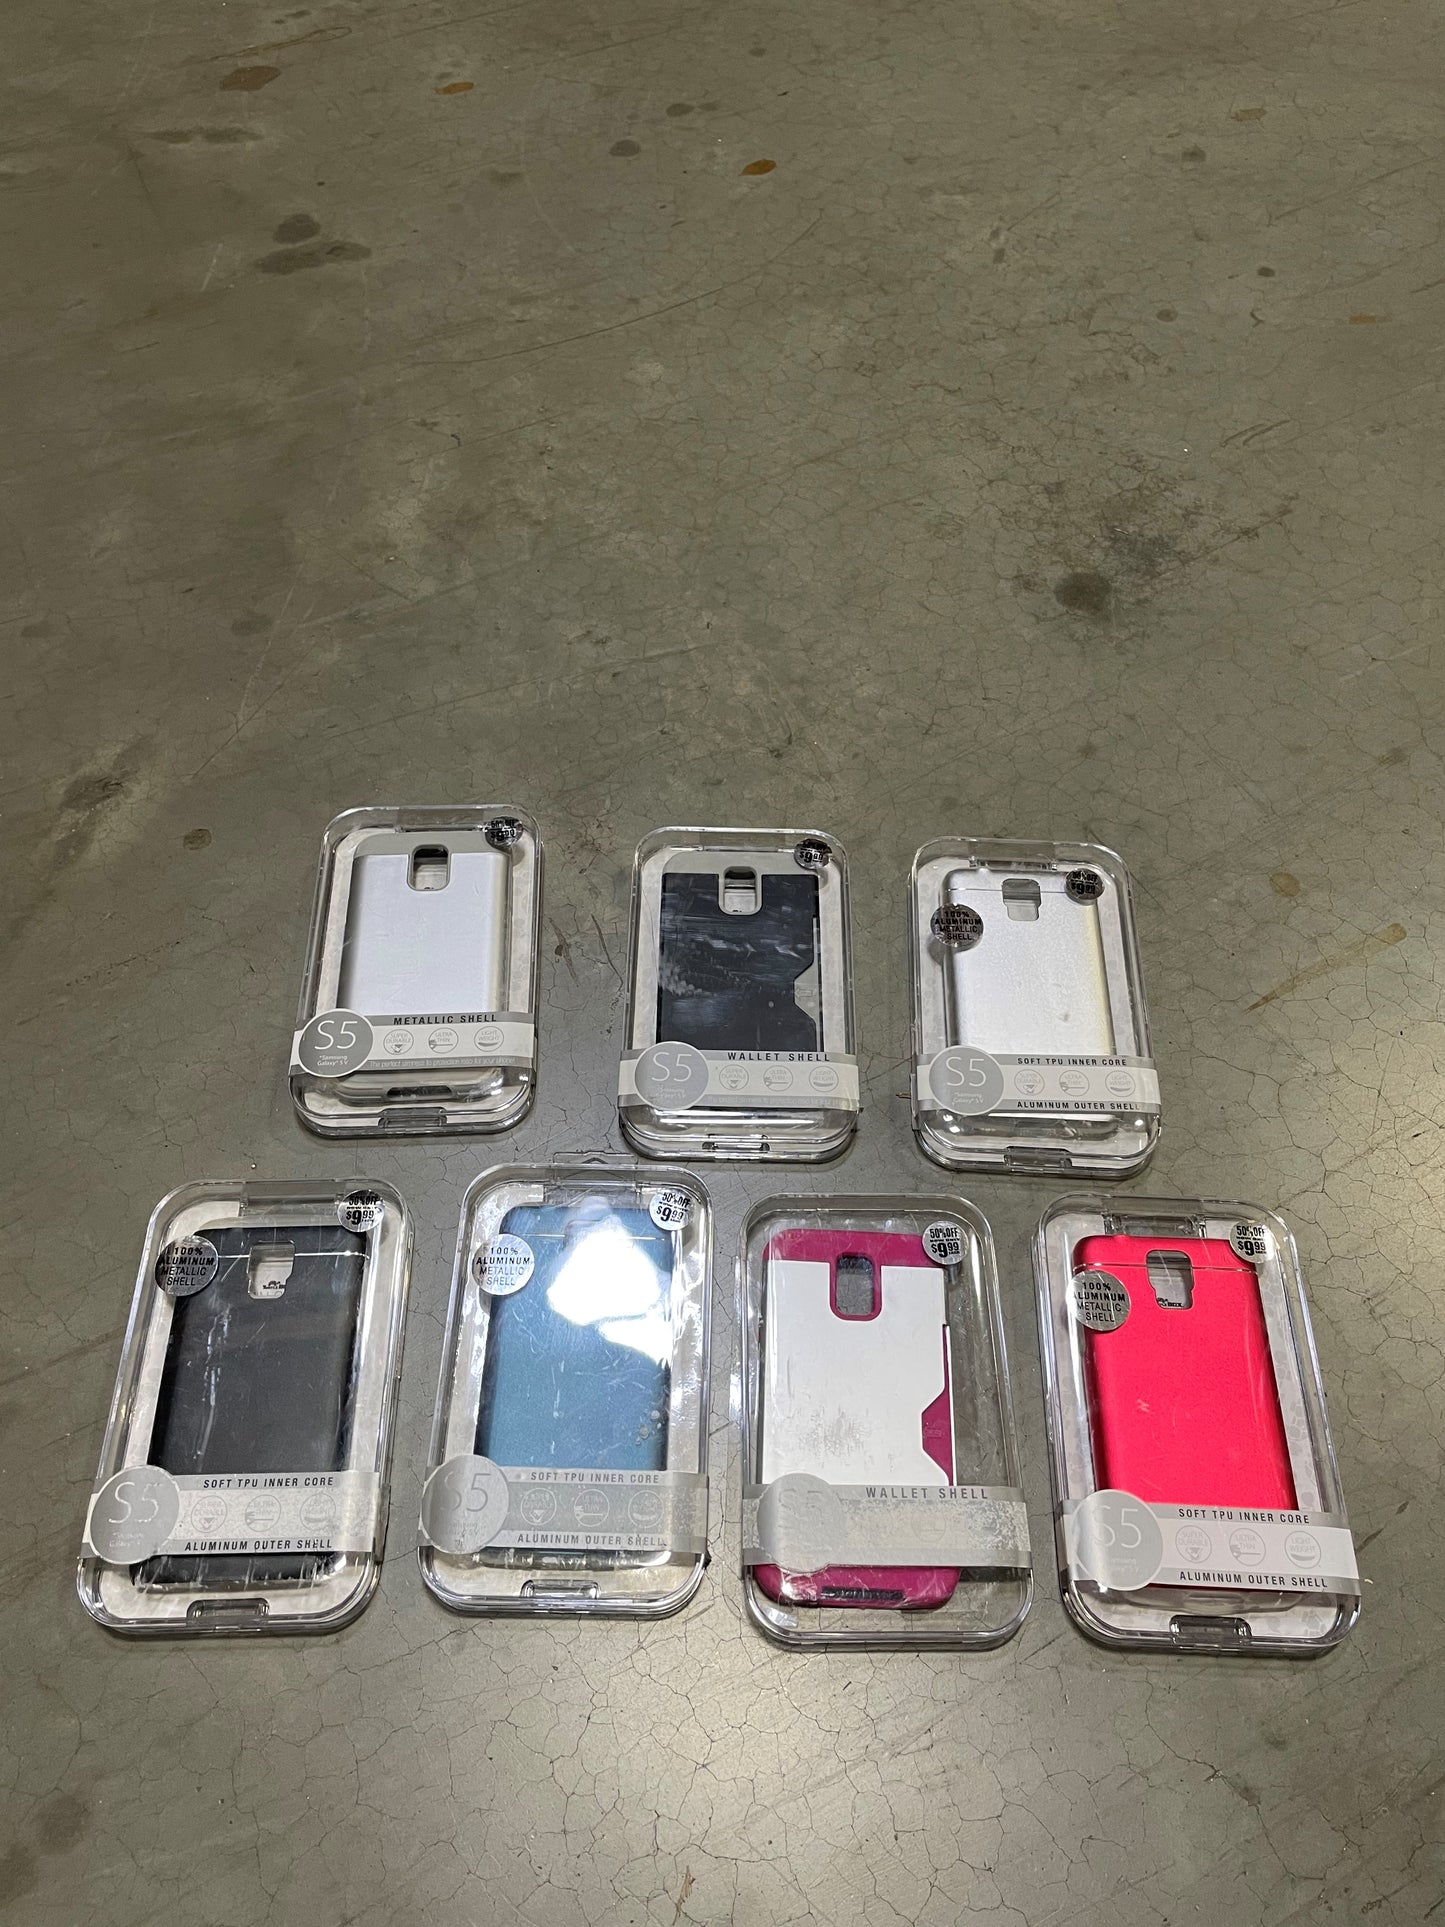 ITEM NUMBER 020948L THIN ARMOR CASE S5 - STORE SURPLUS NO DISPLAY 6 PIECES PER PACK